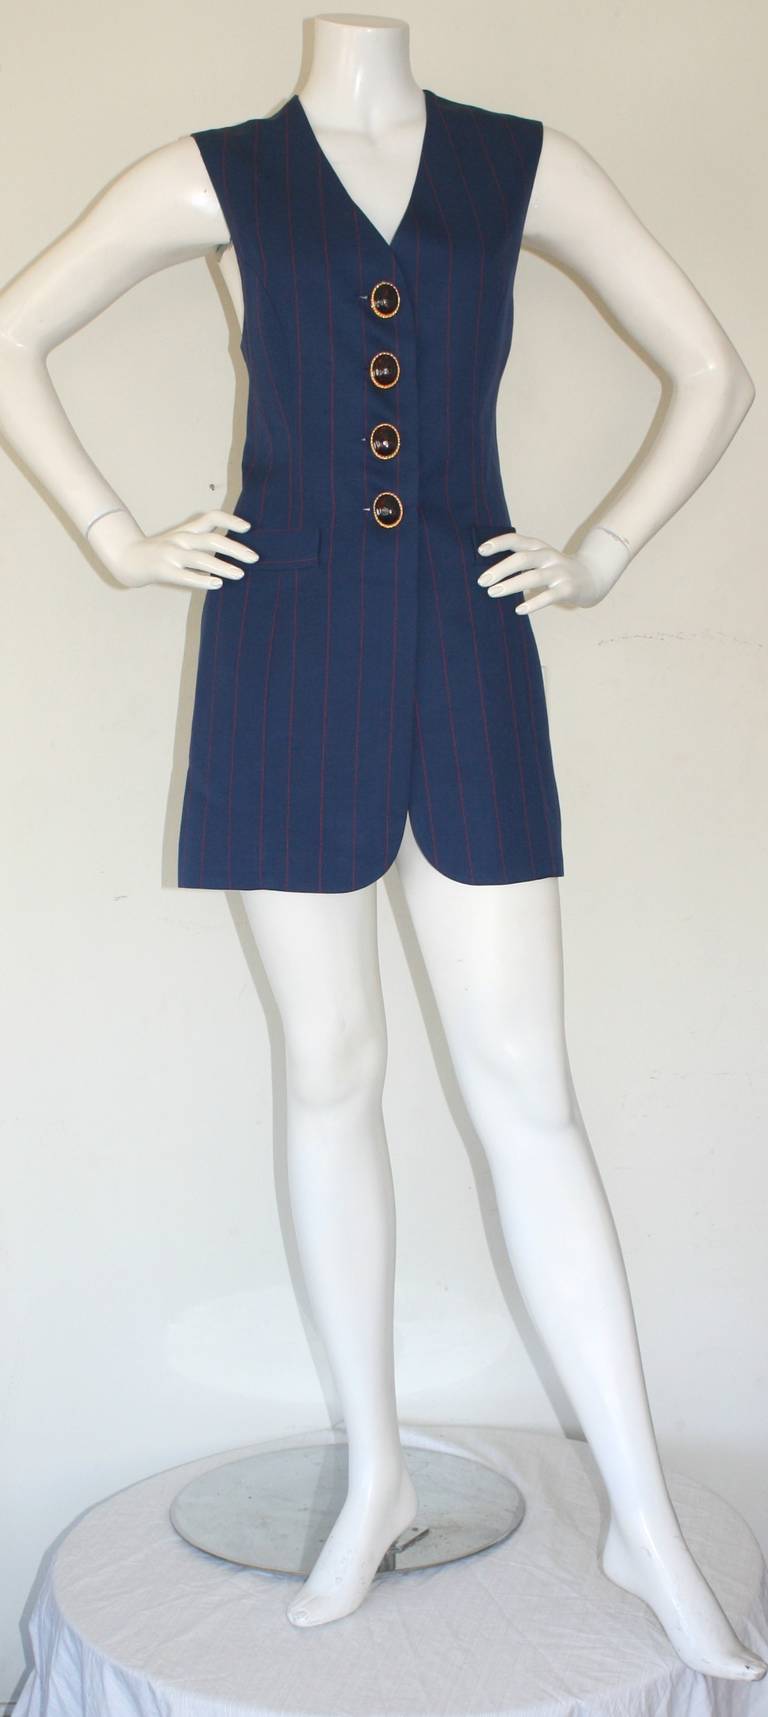 Chic vintage Christian Dior Haute Couture numbered waistcoat dress. Vibrant navy color, with red pinstripes. Amazing statement buttons in heavy red stones. In great condition. Will fit up to Size Medium

Measurements:
36 inch bust
30 inch